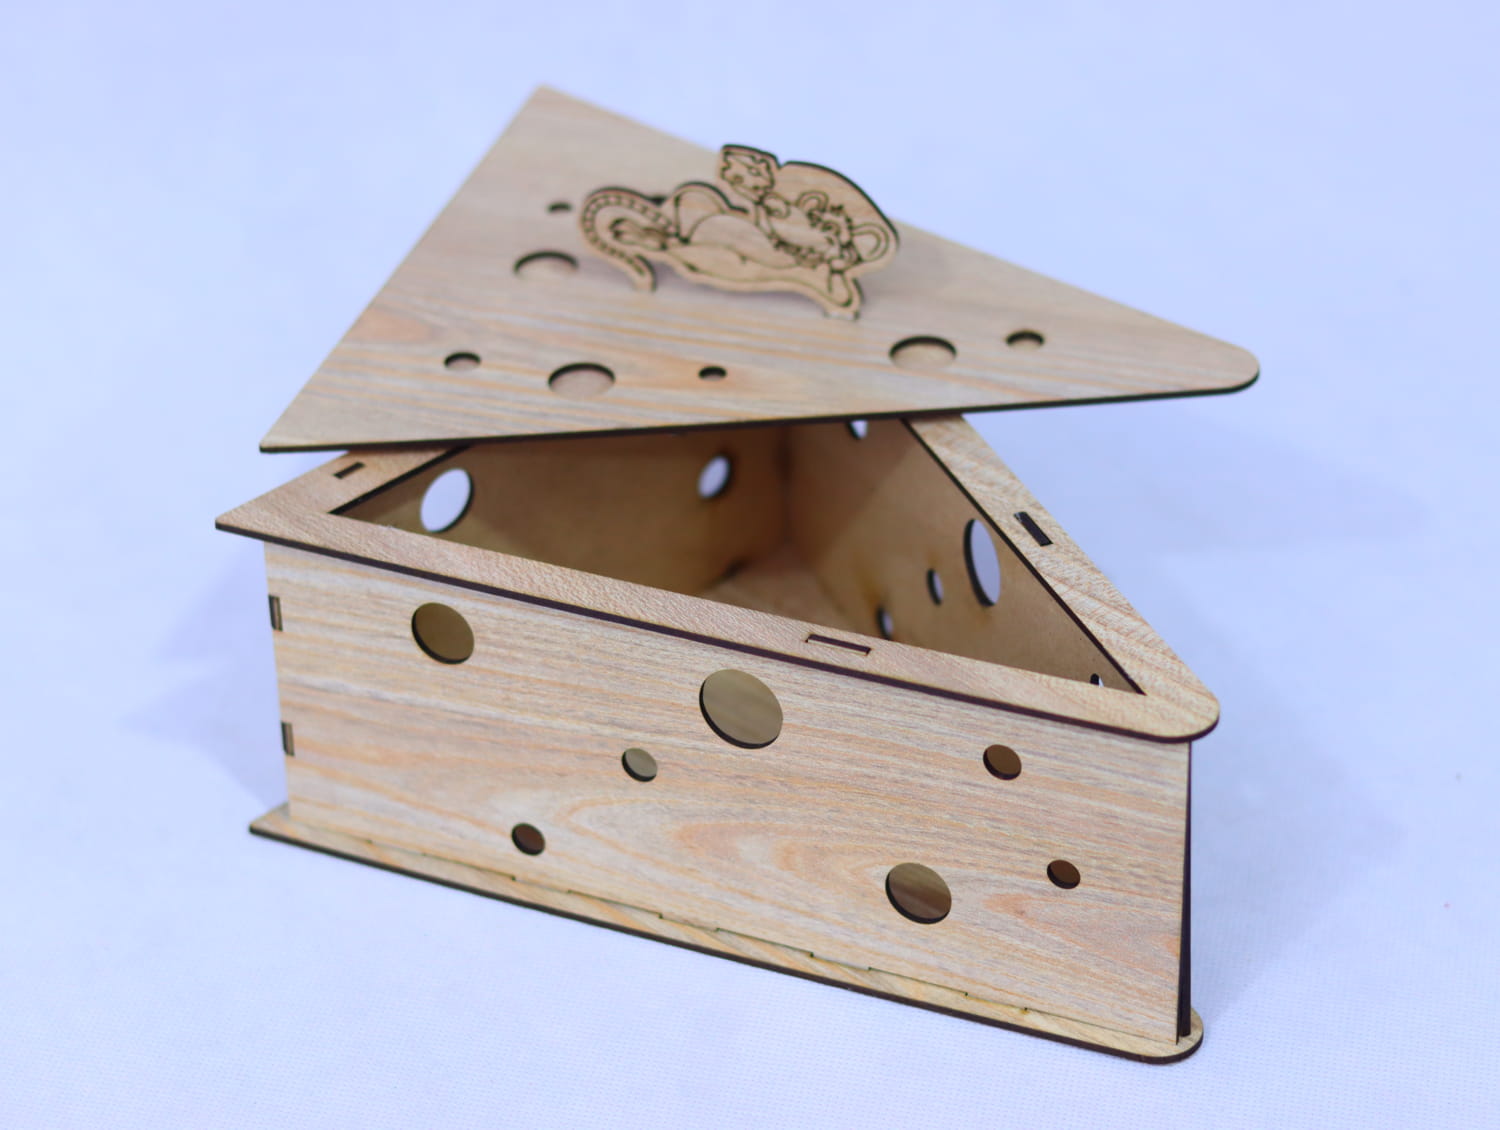 Laser Cut Mouse Cheese Box MDF 3mm Free Vector